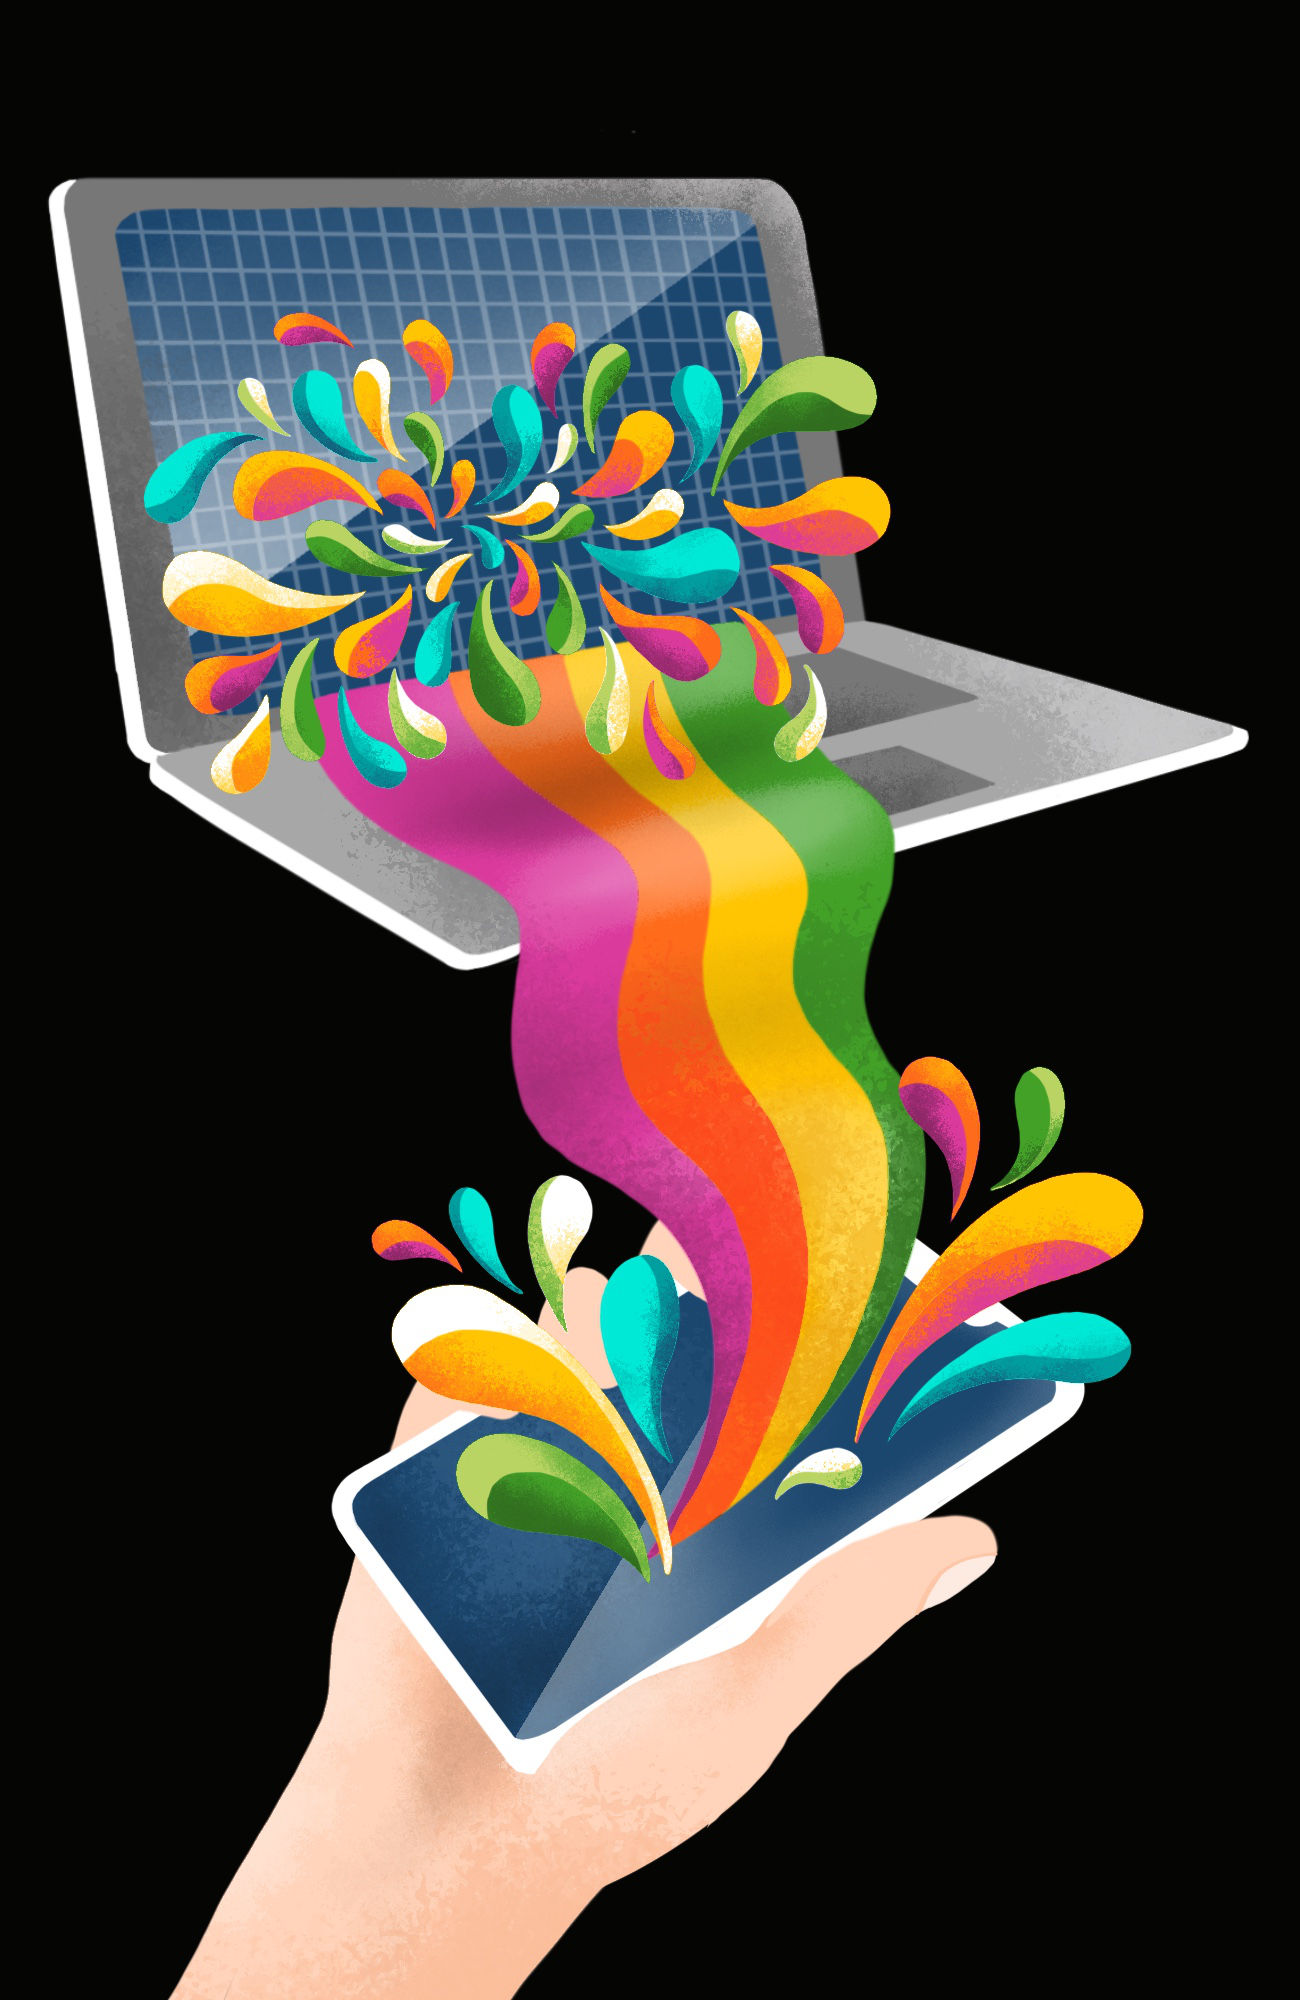 Rainbow paint pouring out of a laptop into a mobile device, representing software built to work on all screen sizes